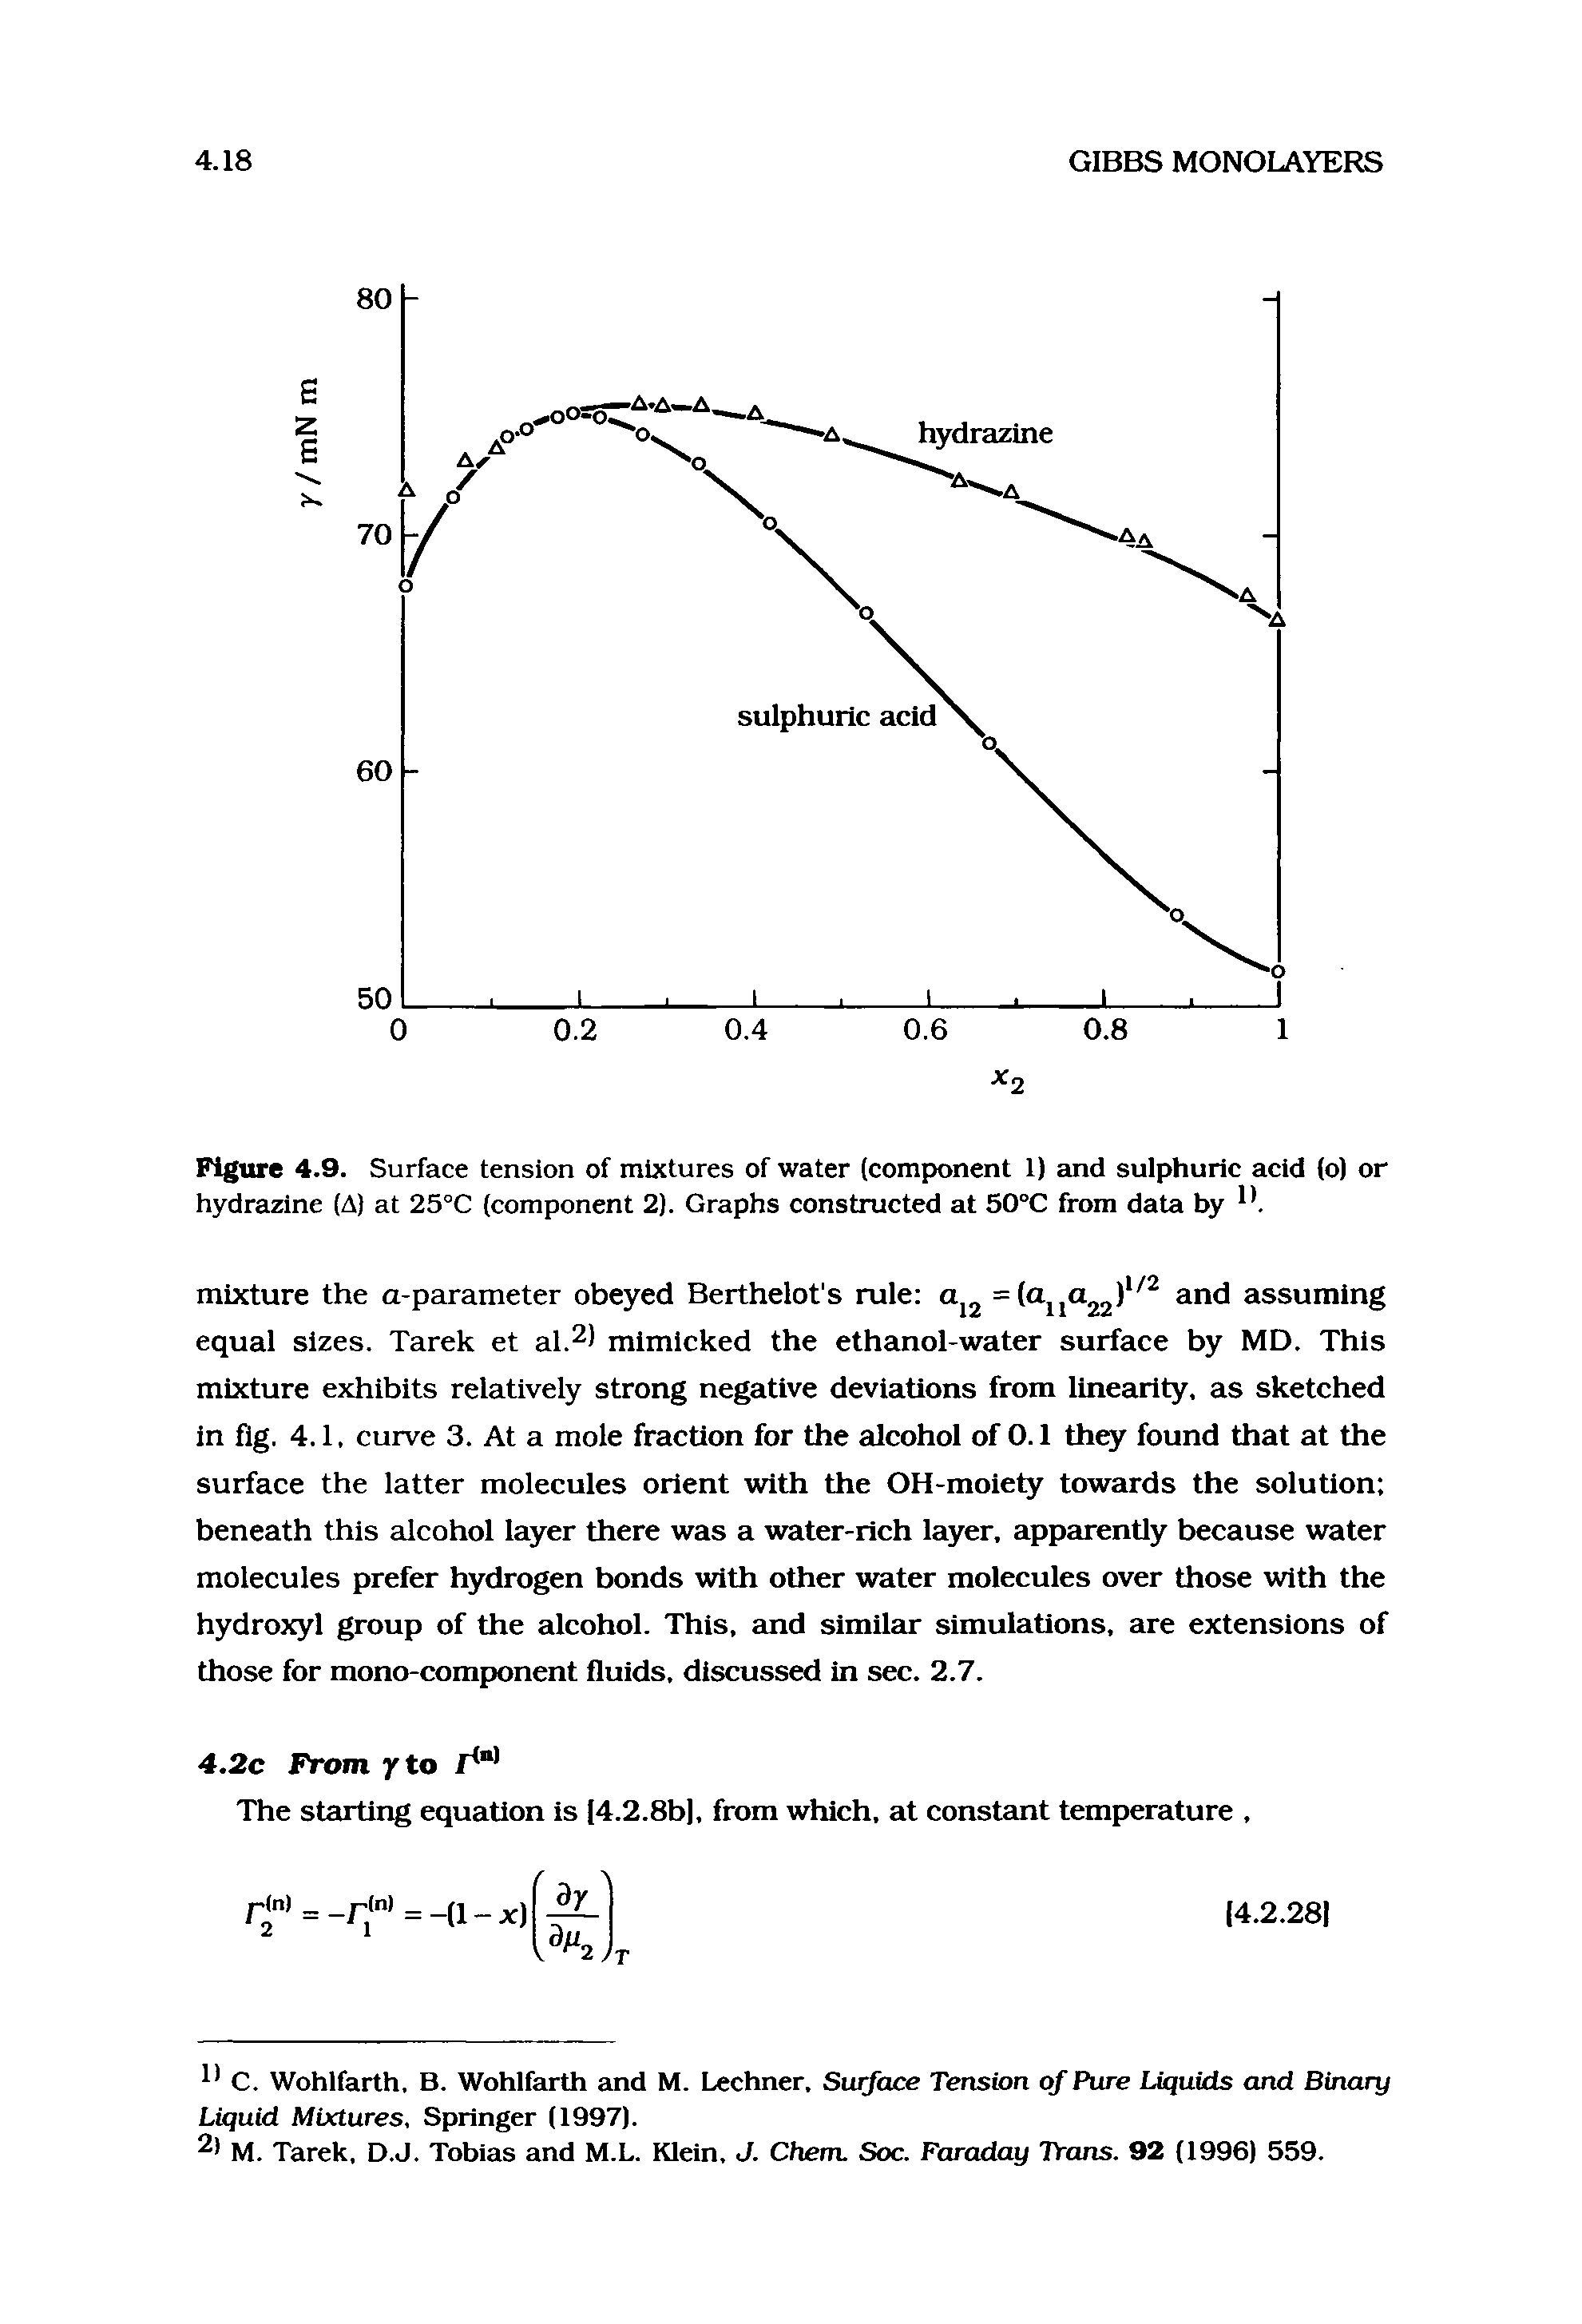 Figure 4.9. Surface tension of mixtures of water (comjxtnent 1) and sulphuric acid (o) or hydrazine (A) at 25°C (component 2). Graphs constructed at 50°C from data by...